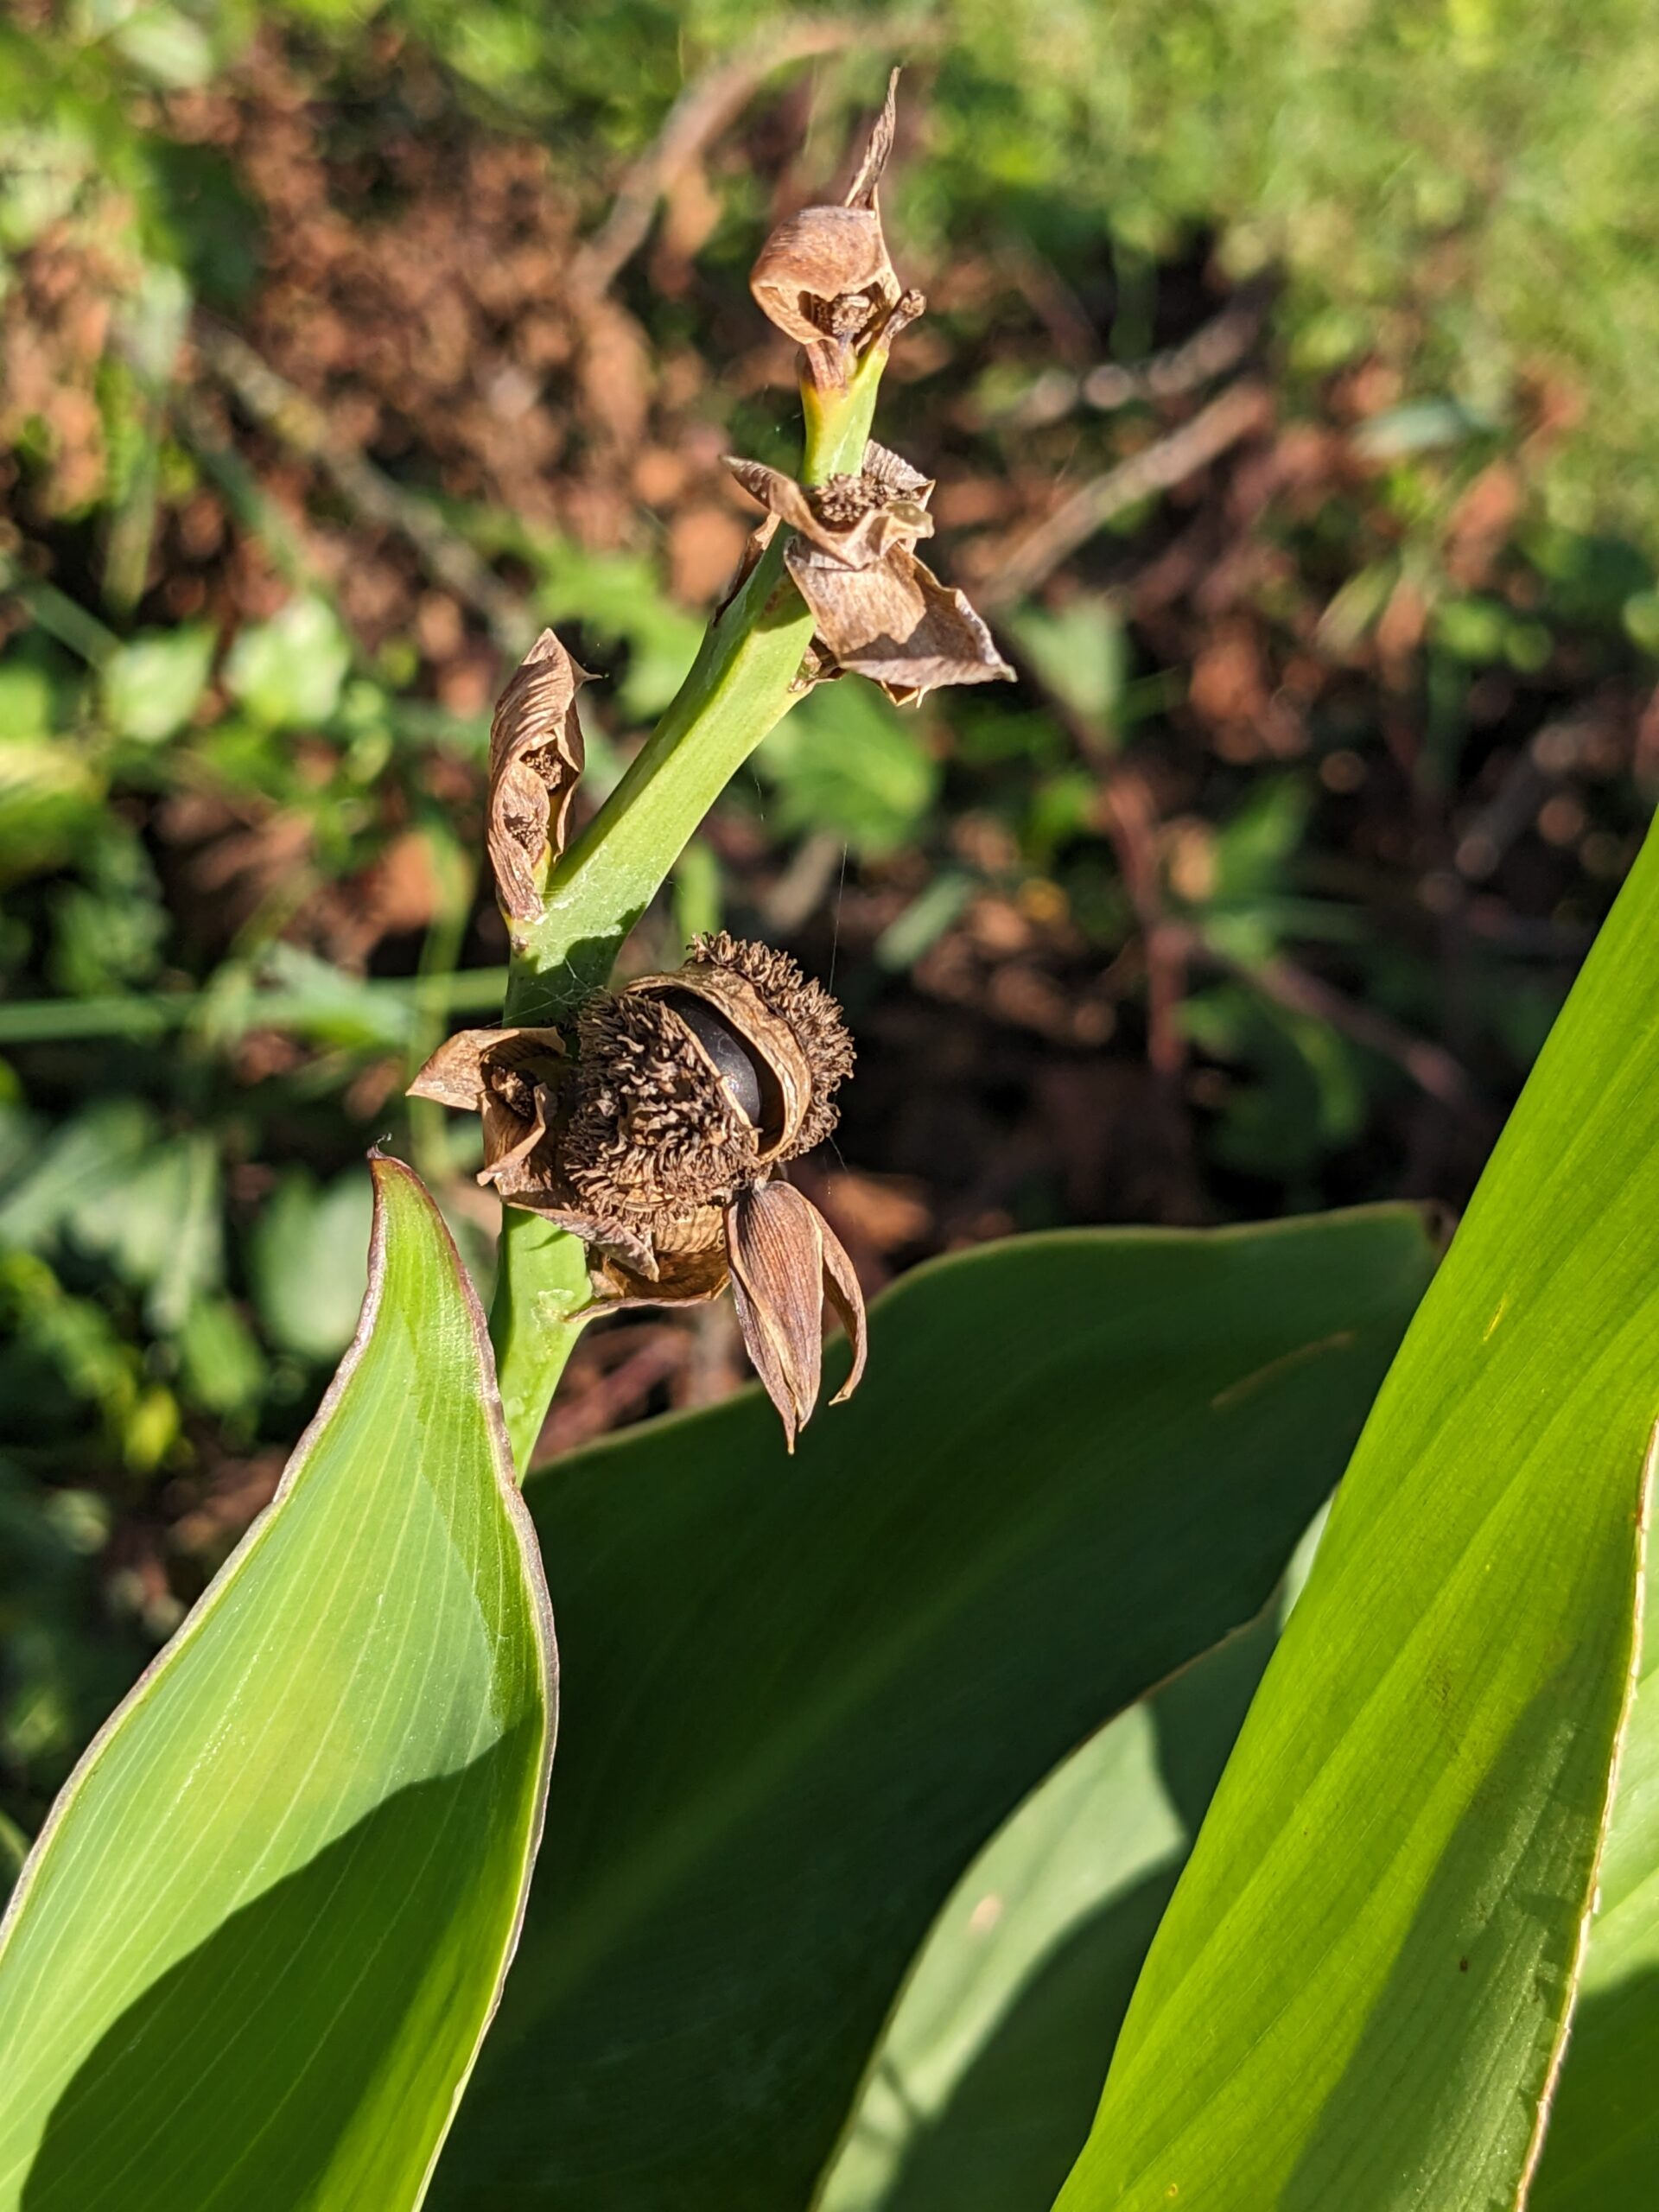 Cannova Rosa has gone to seed - canna lily seed pod with ripe seeds inside